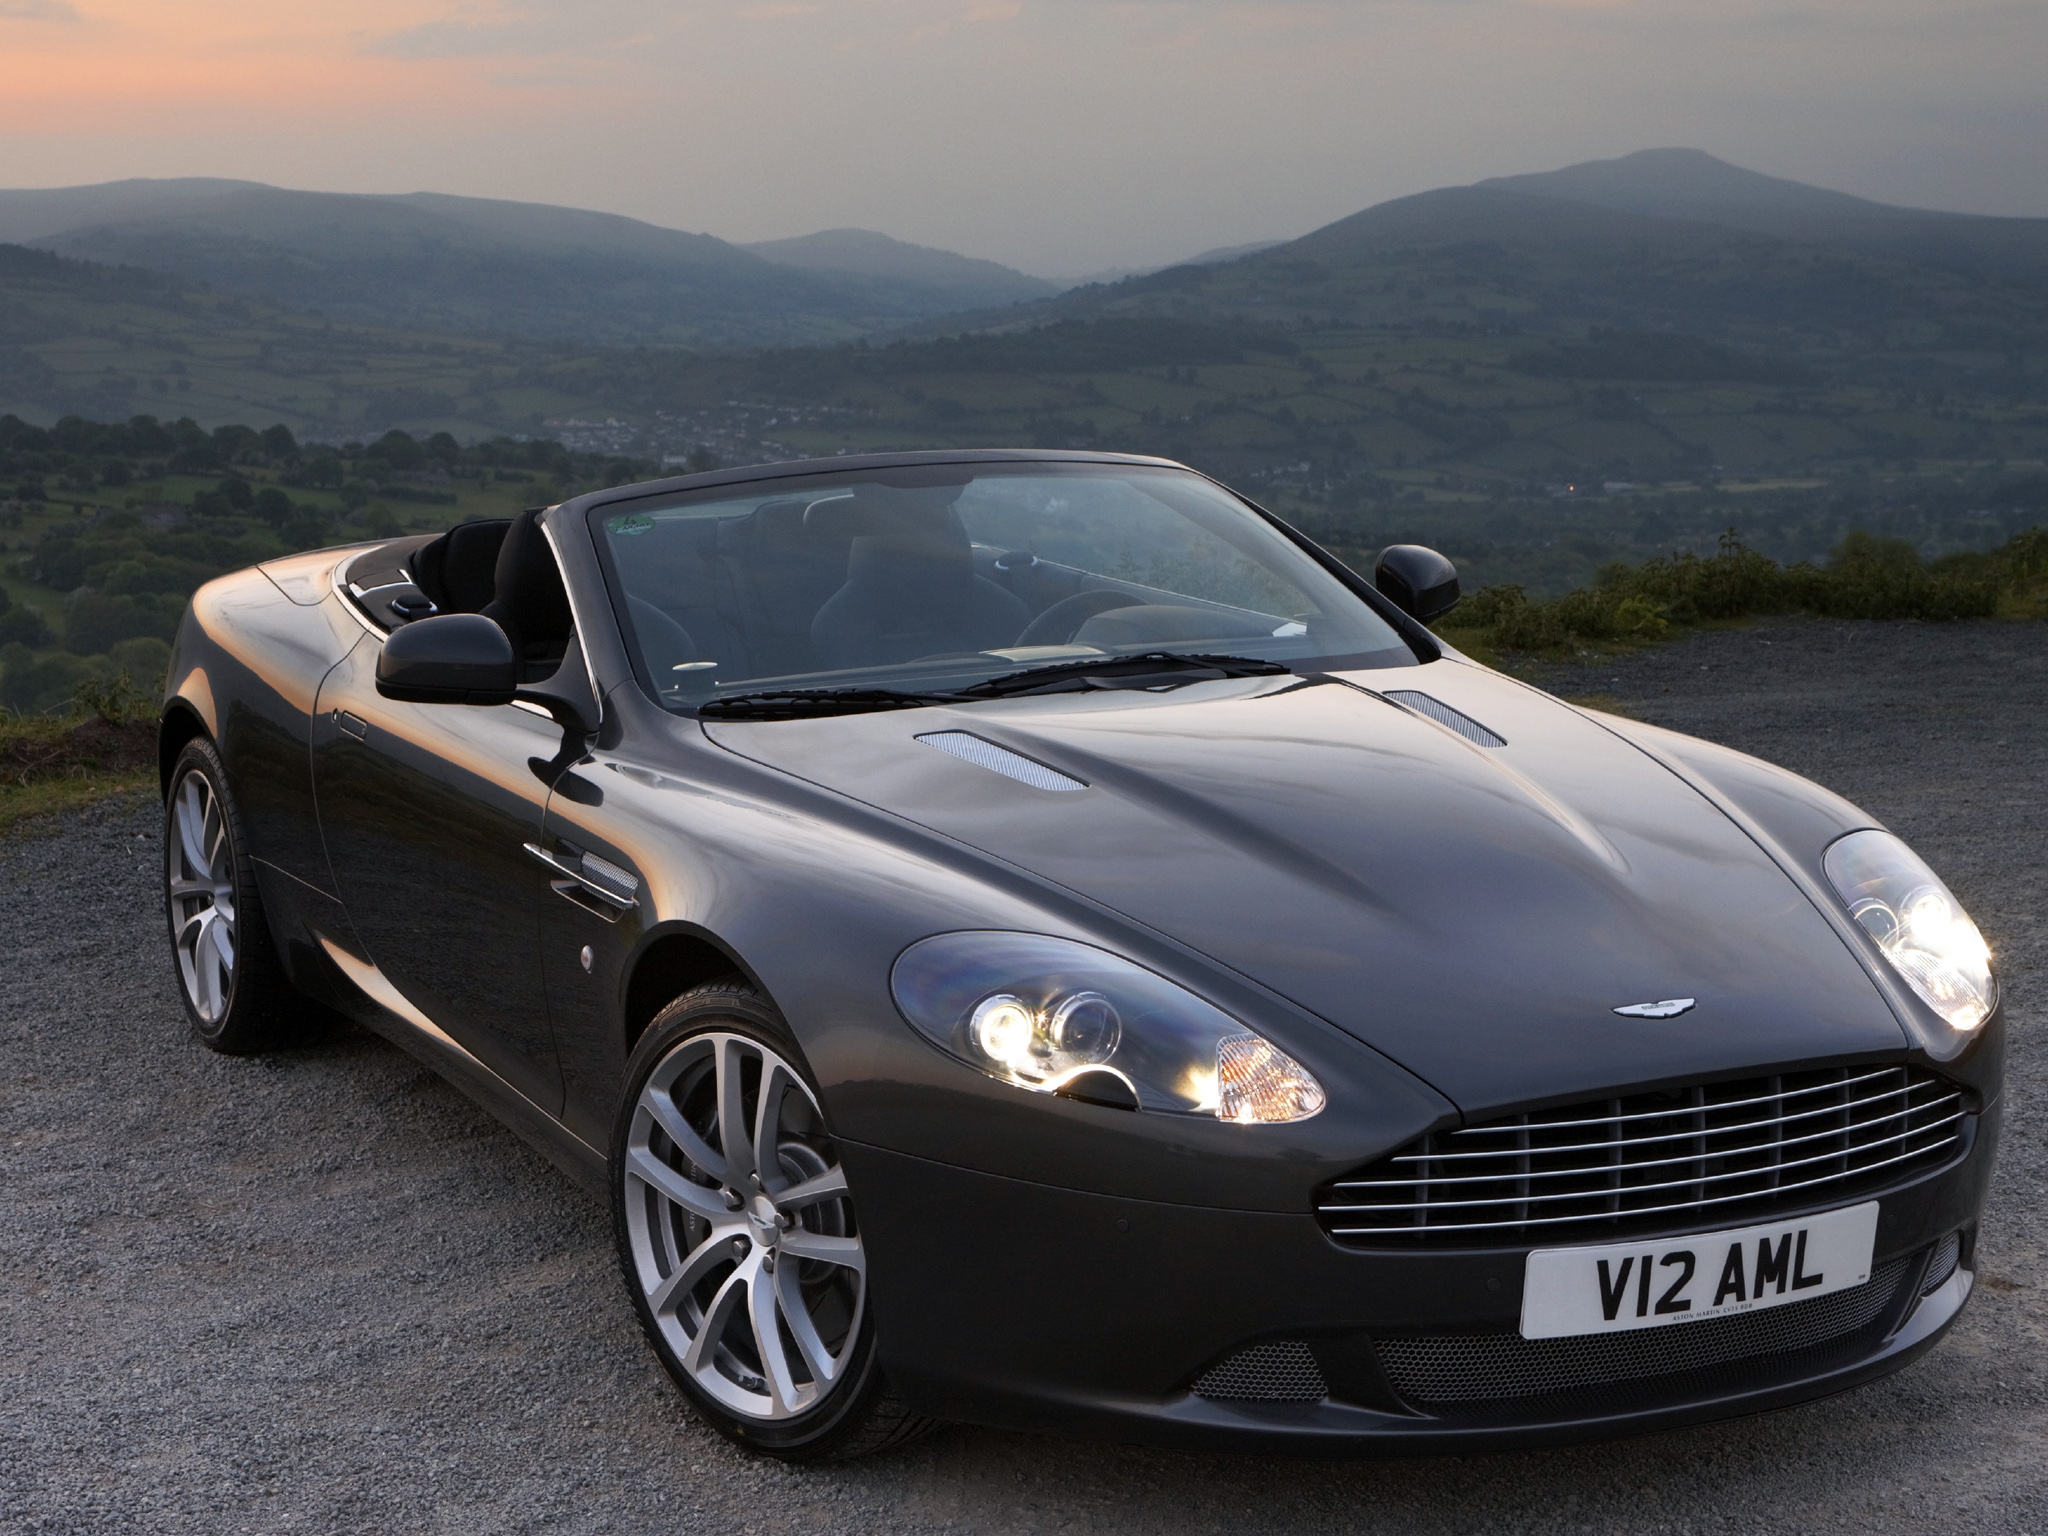 auto, mountains, aston martin, cars, black, front view, style, db9, 2010 lock screen backgrounds